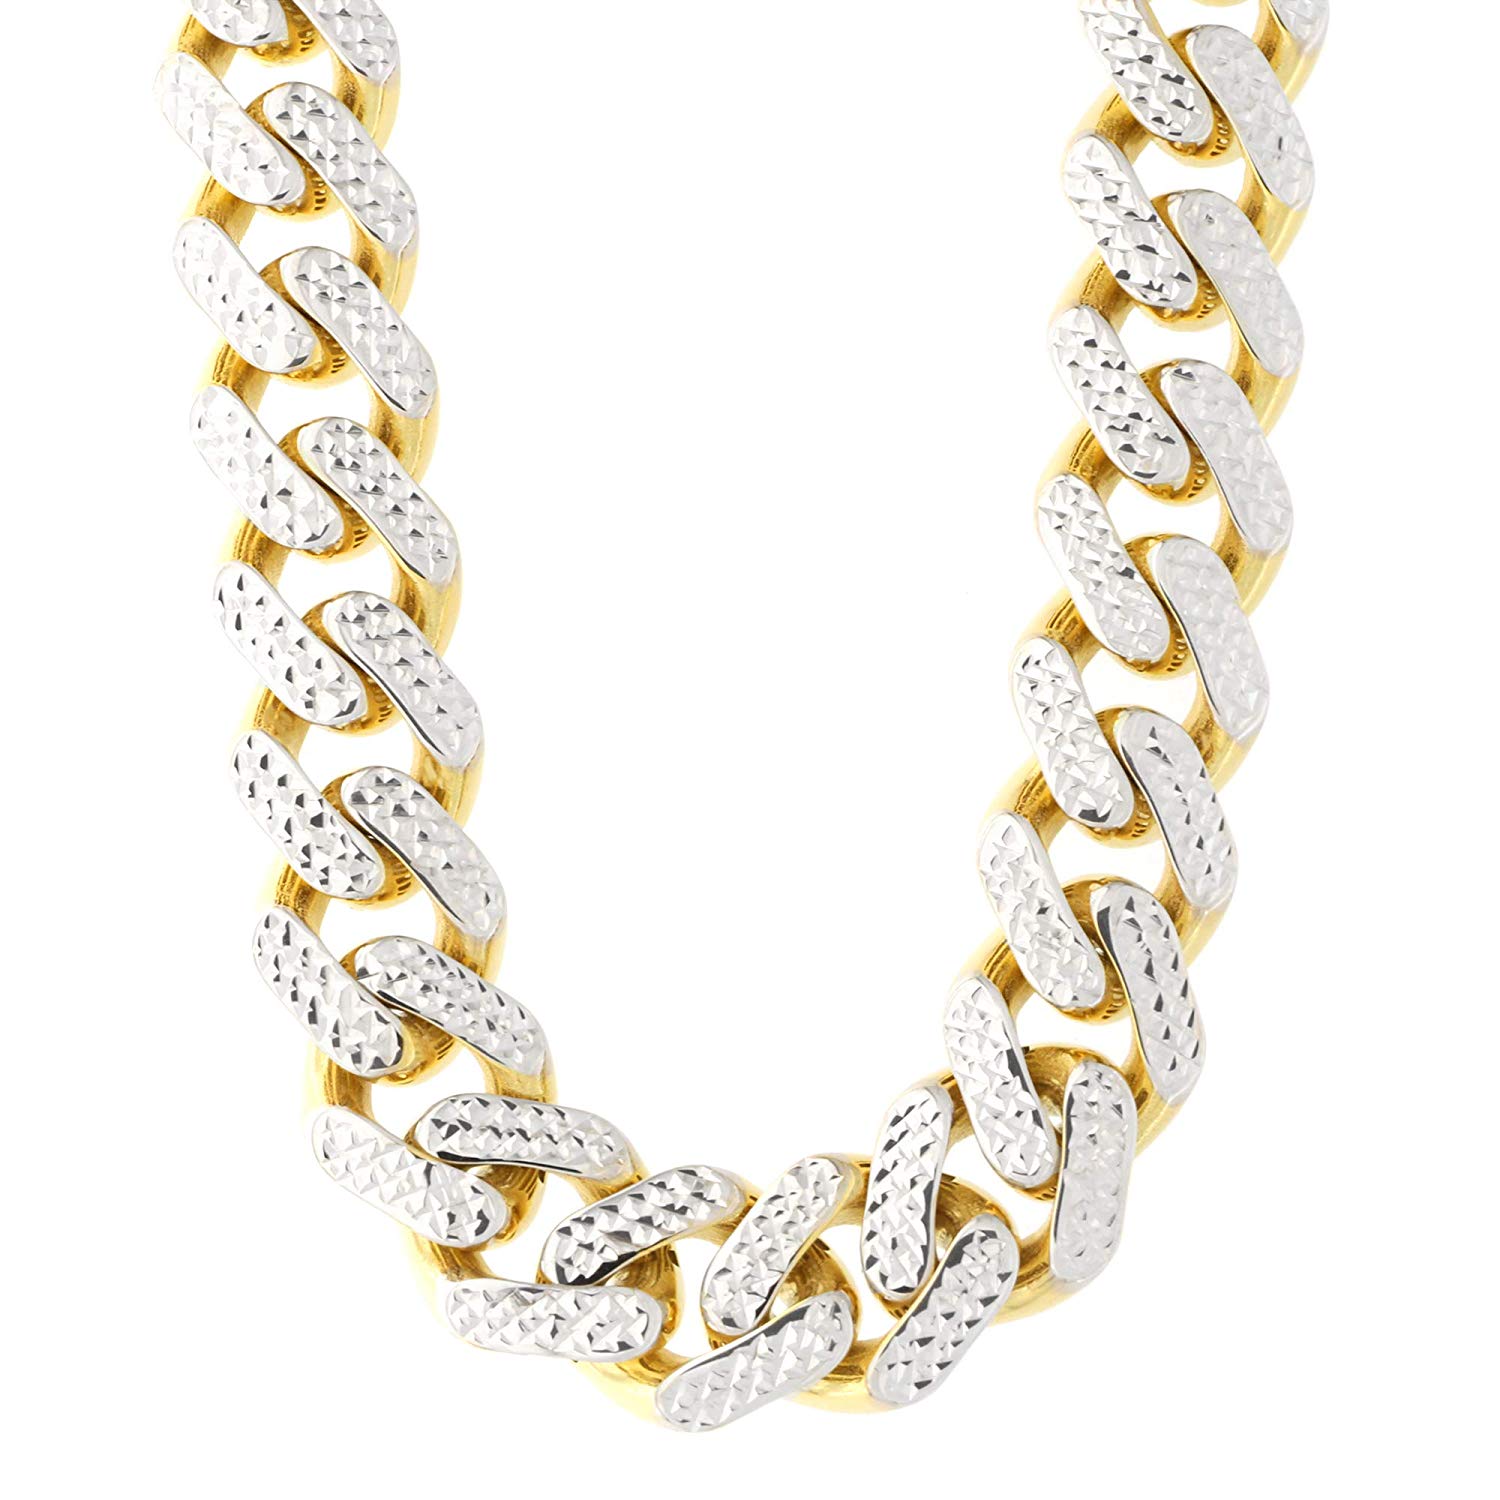 Jewelry Affairs 14k Yellow And White Hollow Gold Miami Cuban Pave Link Chain Necklace, Width 11.3mm, 24"